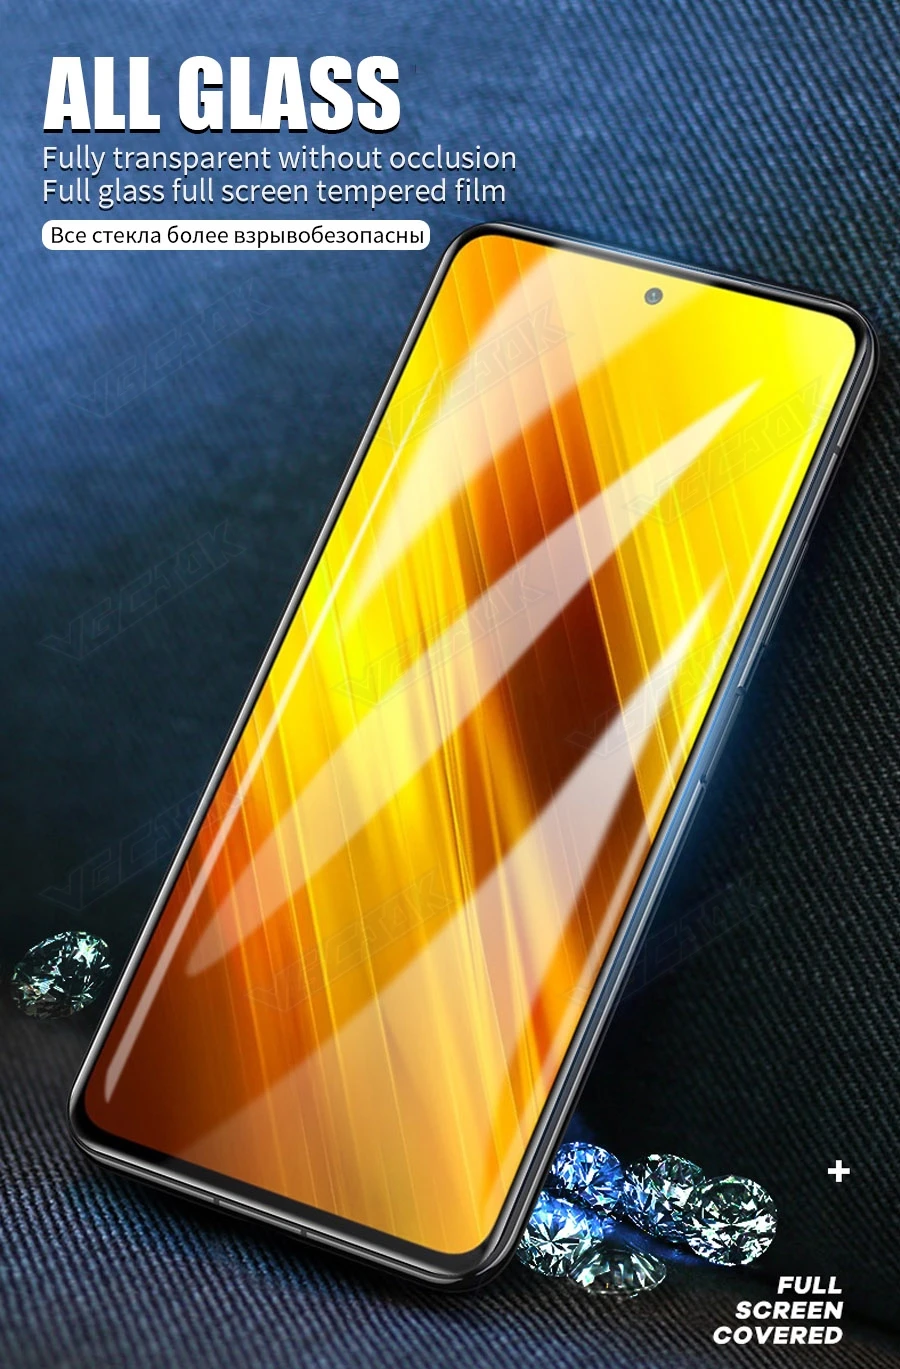 phone screen protectors 9H Tempered Glass For Xiaomi Mi Mix 2S Max 2 3 Screen Protector Glas For Mi 8 SE Lite Poco X3 NFC F1 F2 Pro Protective Film Case t mobile screen protector